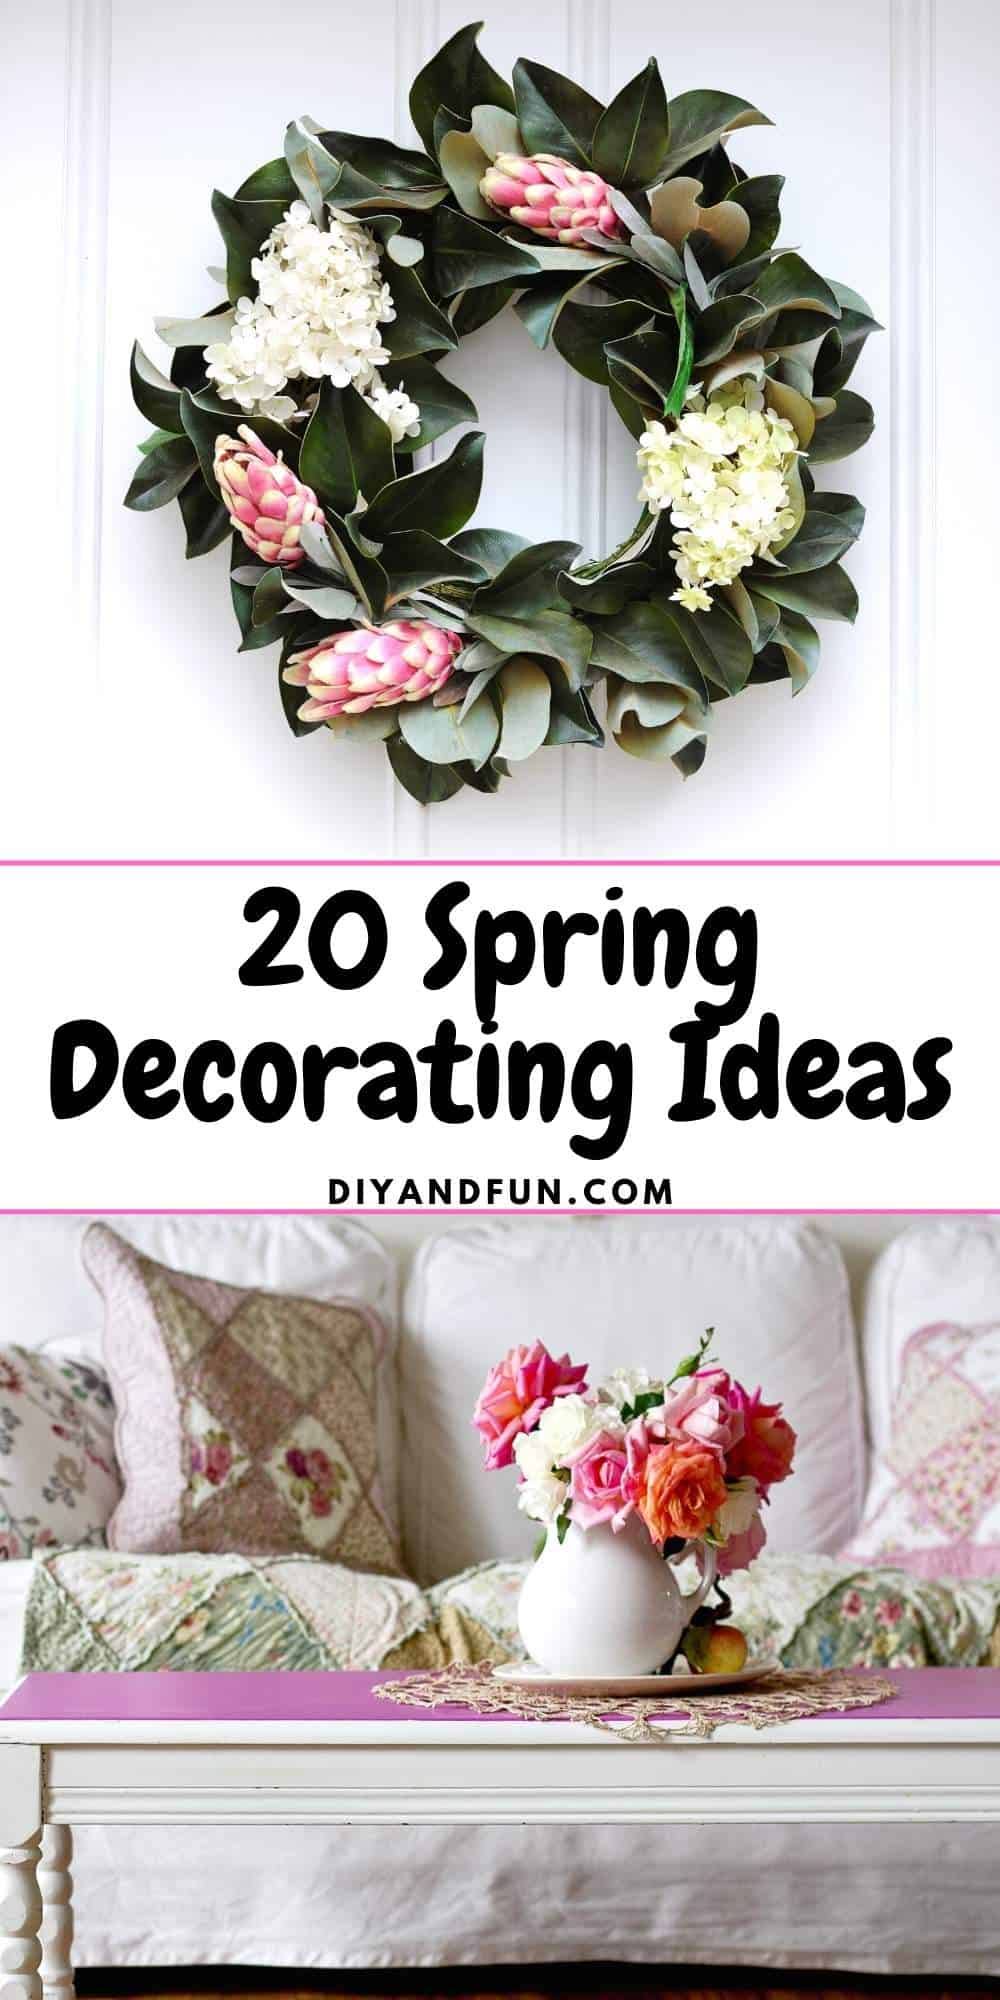 20 Spring Decorating Ideas, a listing of simple ideas that you can do to make your home ready for the spring season.